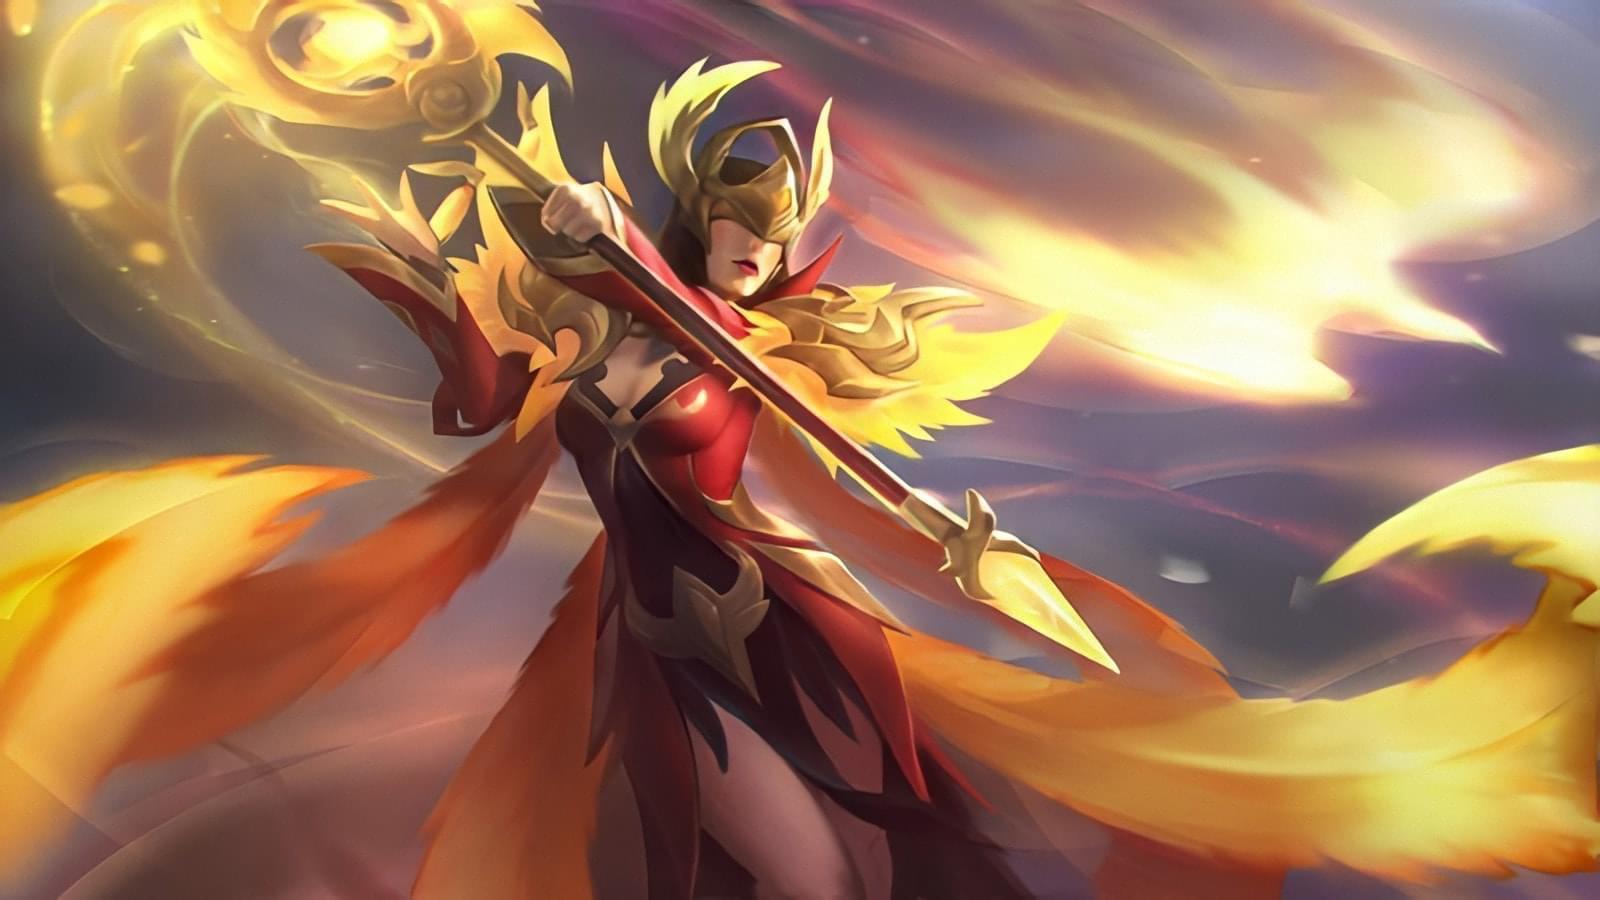 Pharsa's upcoming epic skin worthy of lucky box or nah?